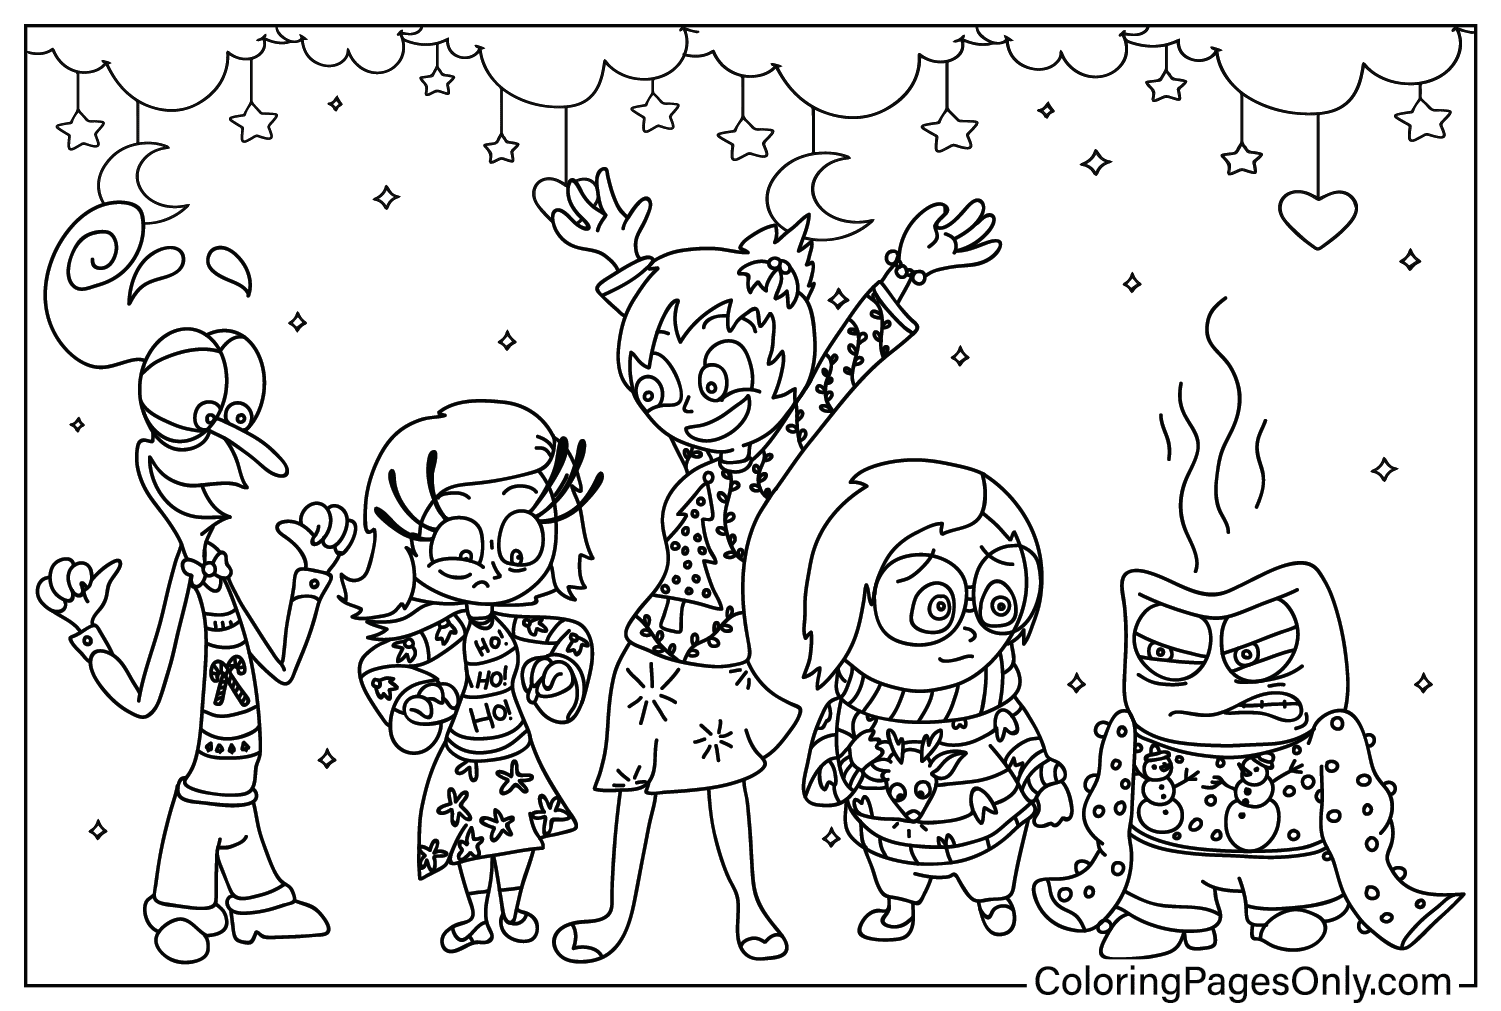 Coloring Page Five characters from Inside Out 2 from Inside Out 2